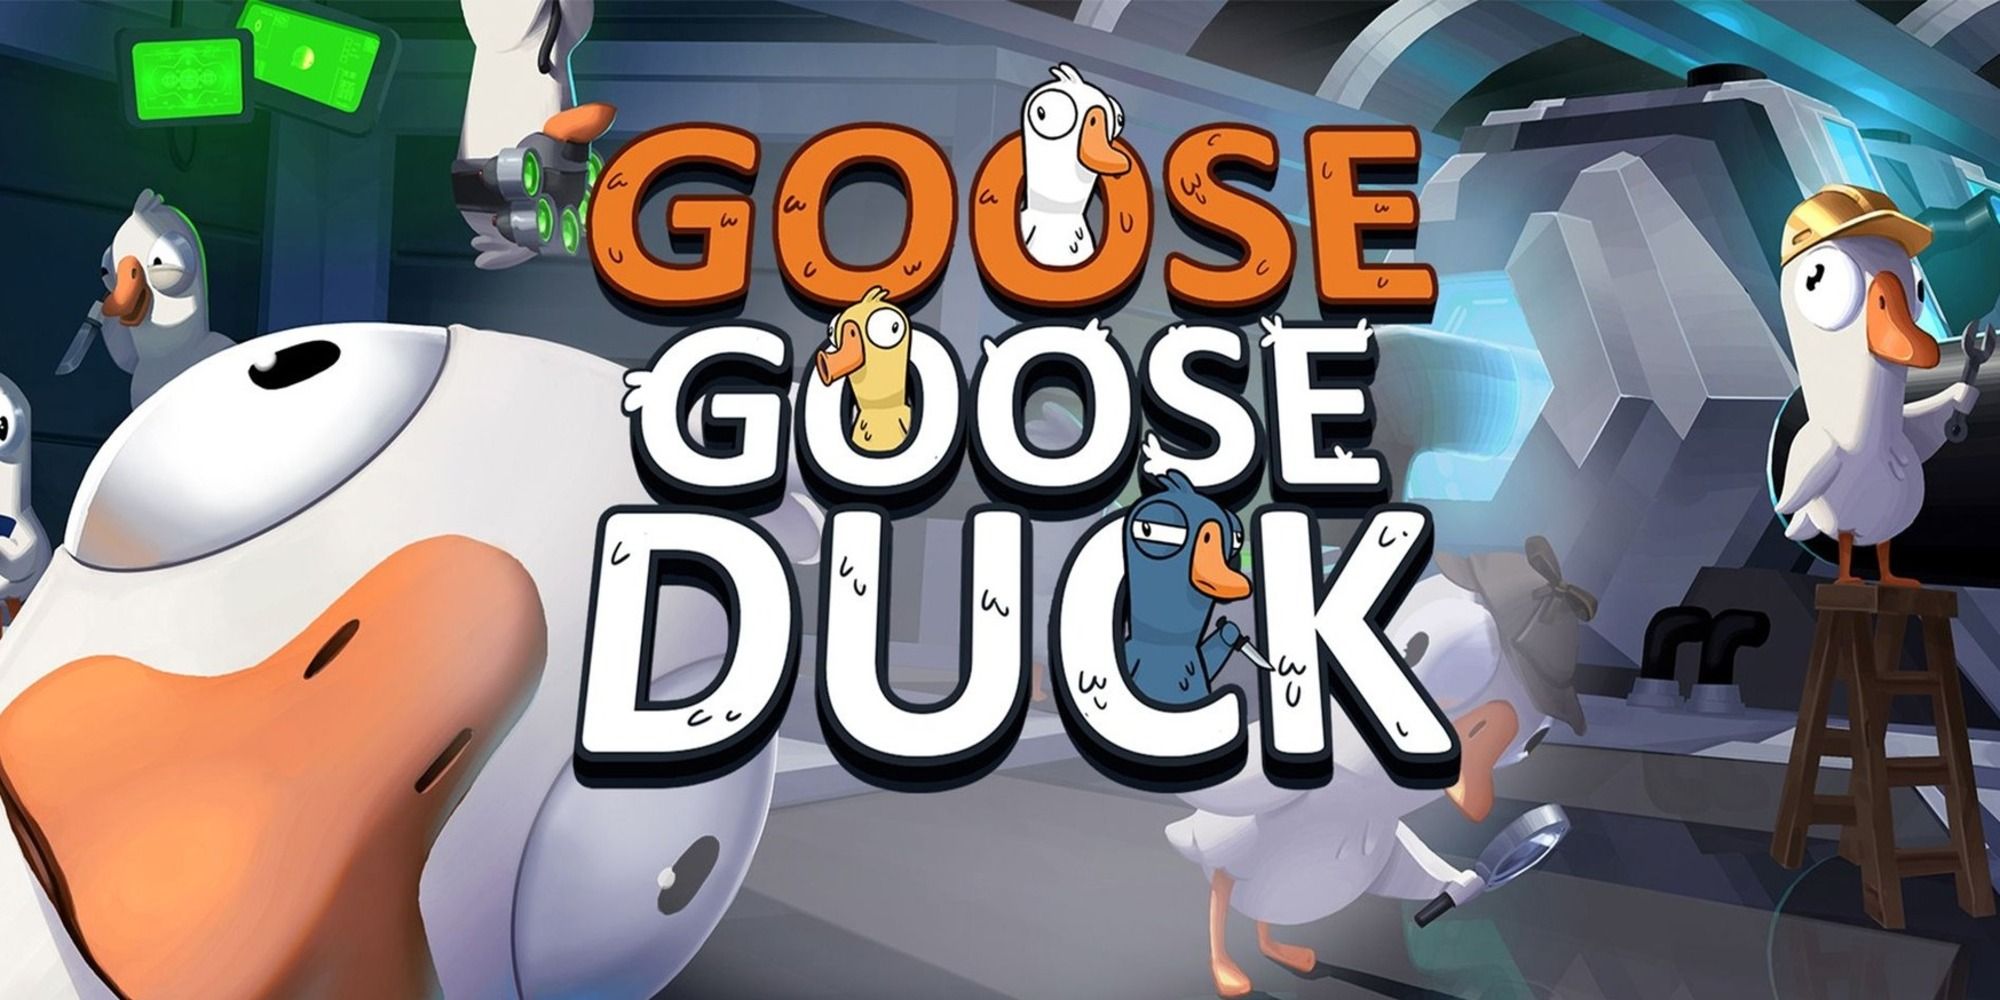 The cover image from Goose Goose Duck